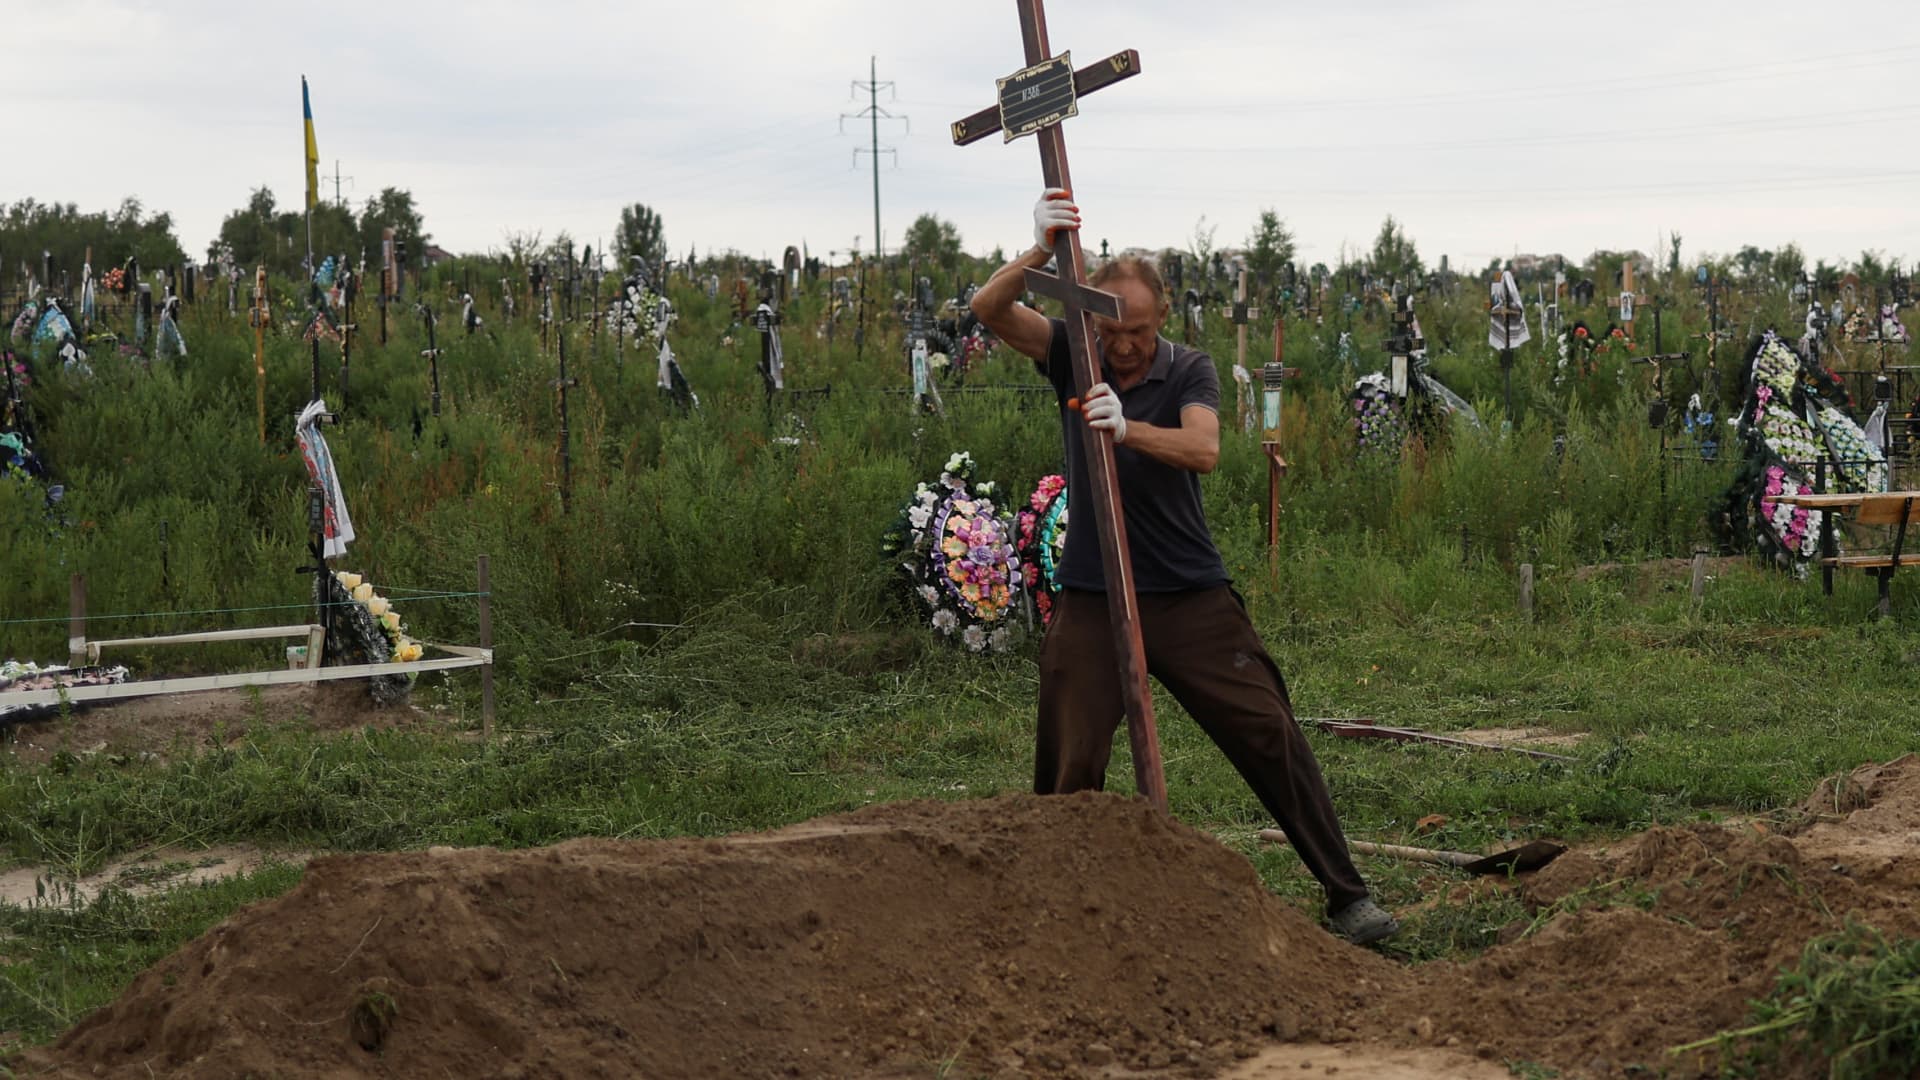 Volunteers lower into a grave a coffin with one of fourteen unidentified persons killed by Russian troops, amid Russia's attack on Ukraine continues, during a burial ceremony in the town of Bucha, in Kyiv region, Ukraine August 9, 2022.